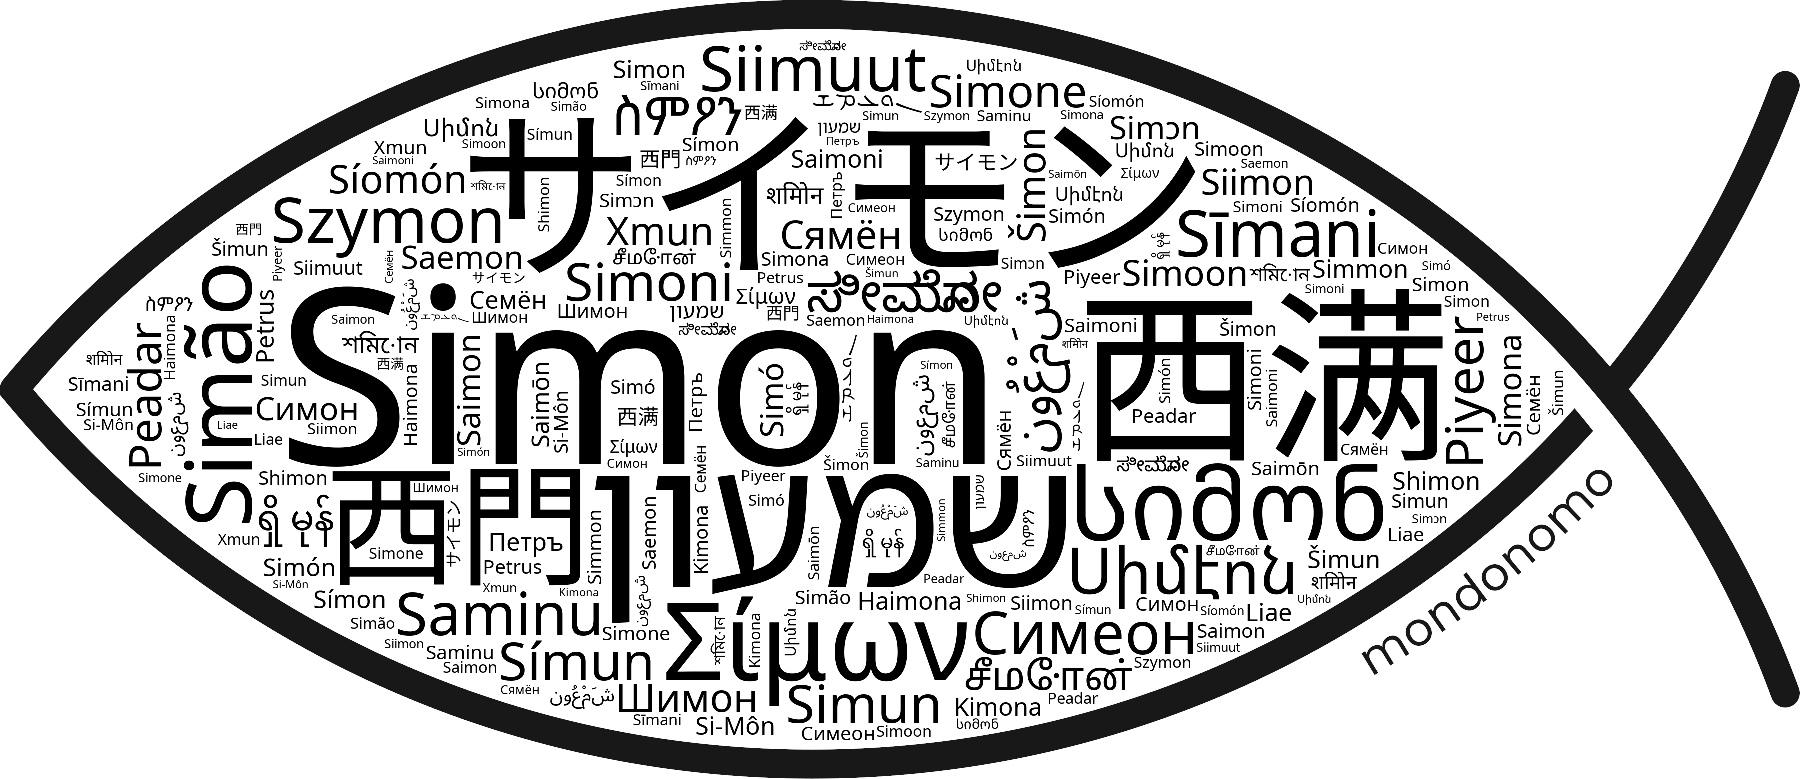 Name Simon in the world's Bibles